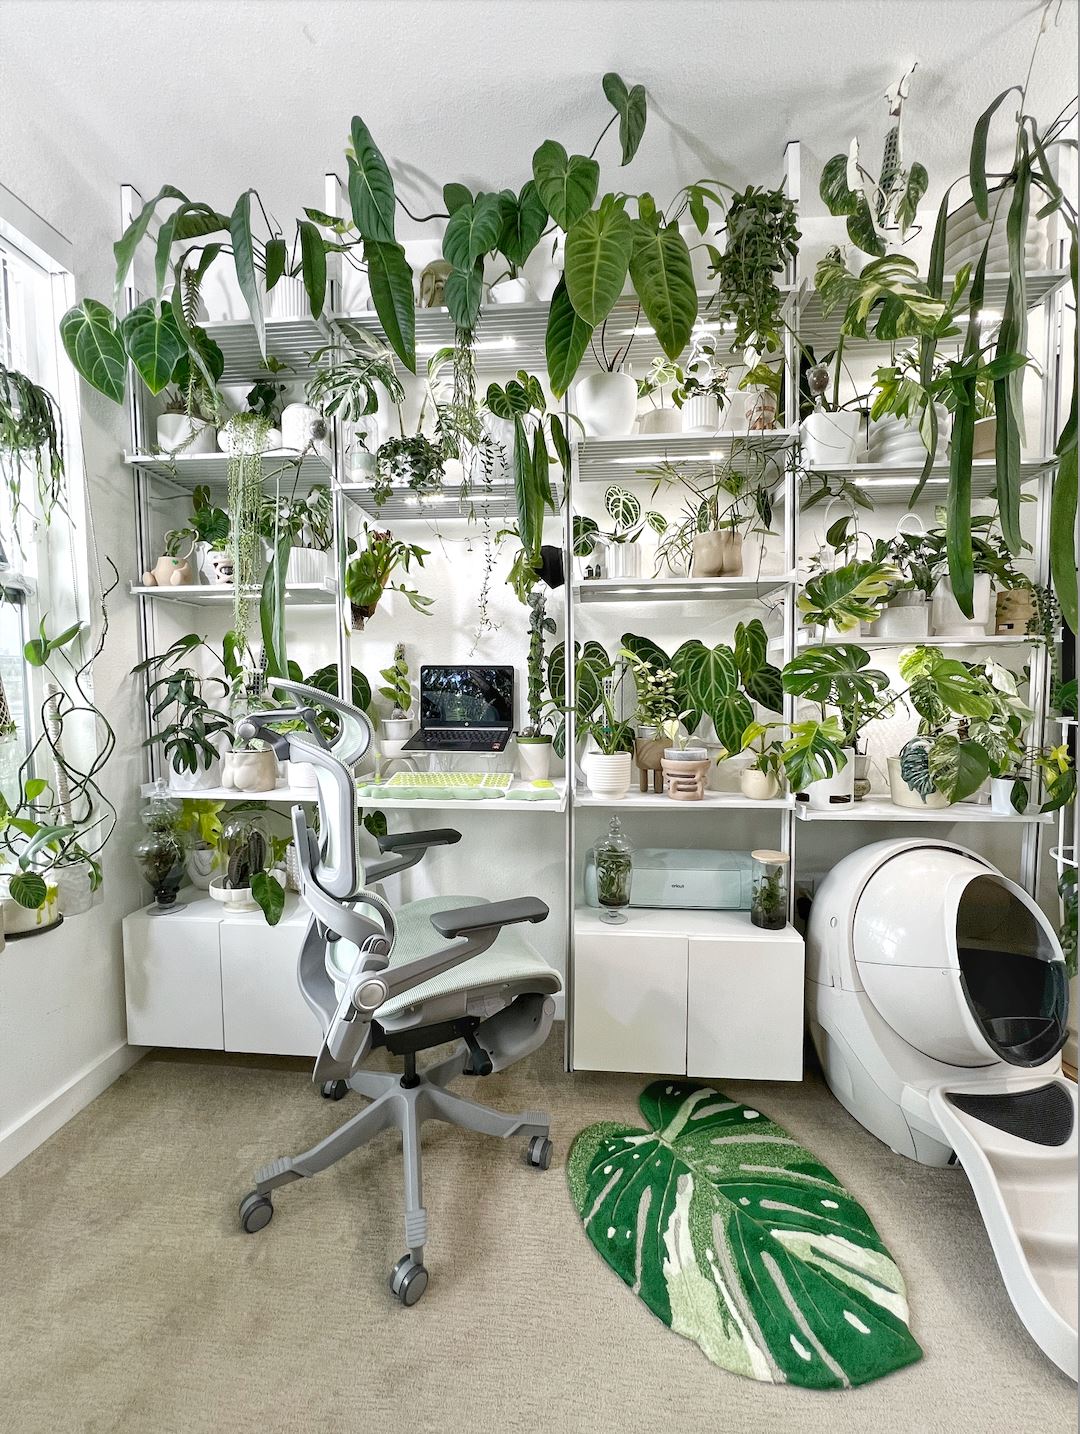 Renter Uses Shelves to House His Plant Collection